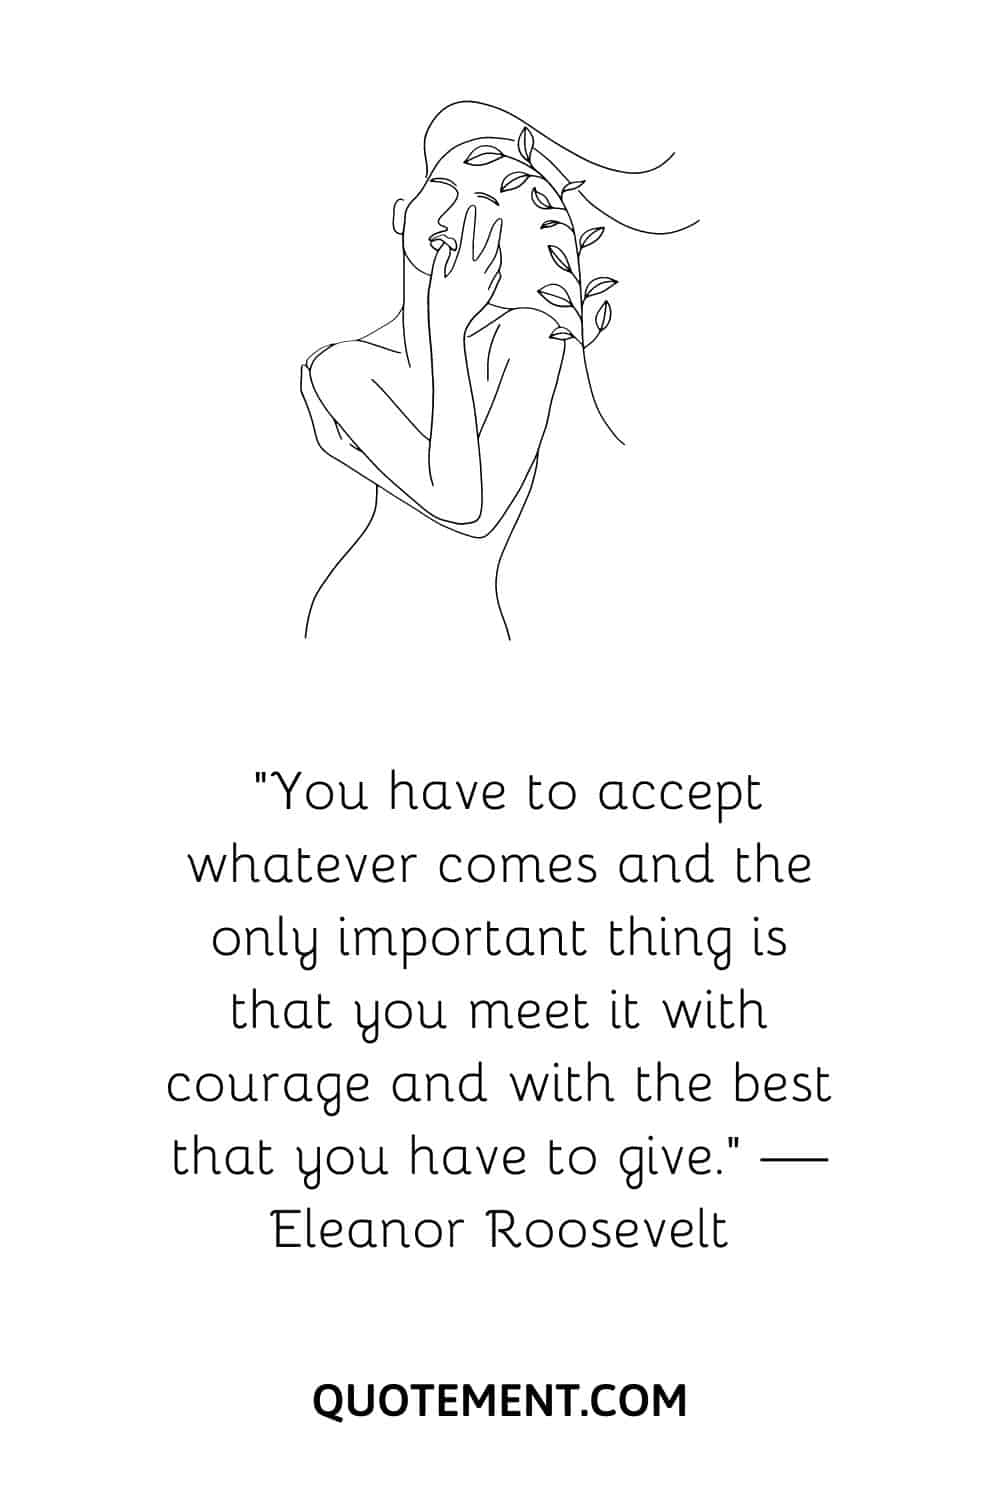 illustration of a woman's body representing the greatest acceptance quote